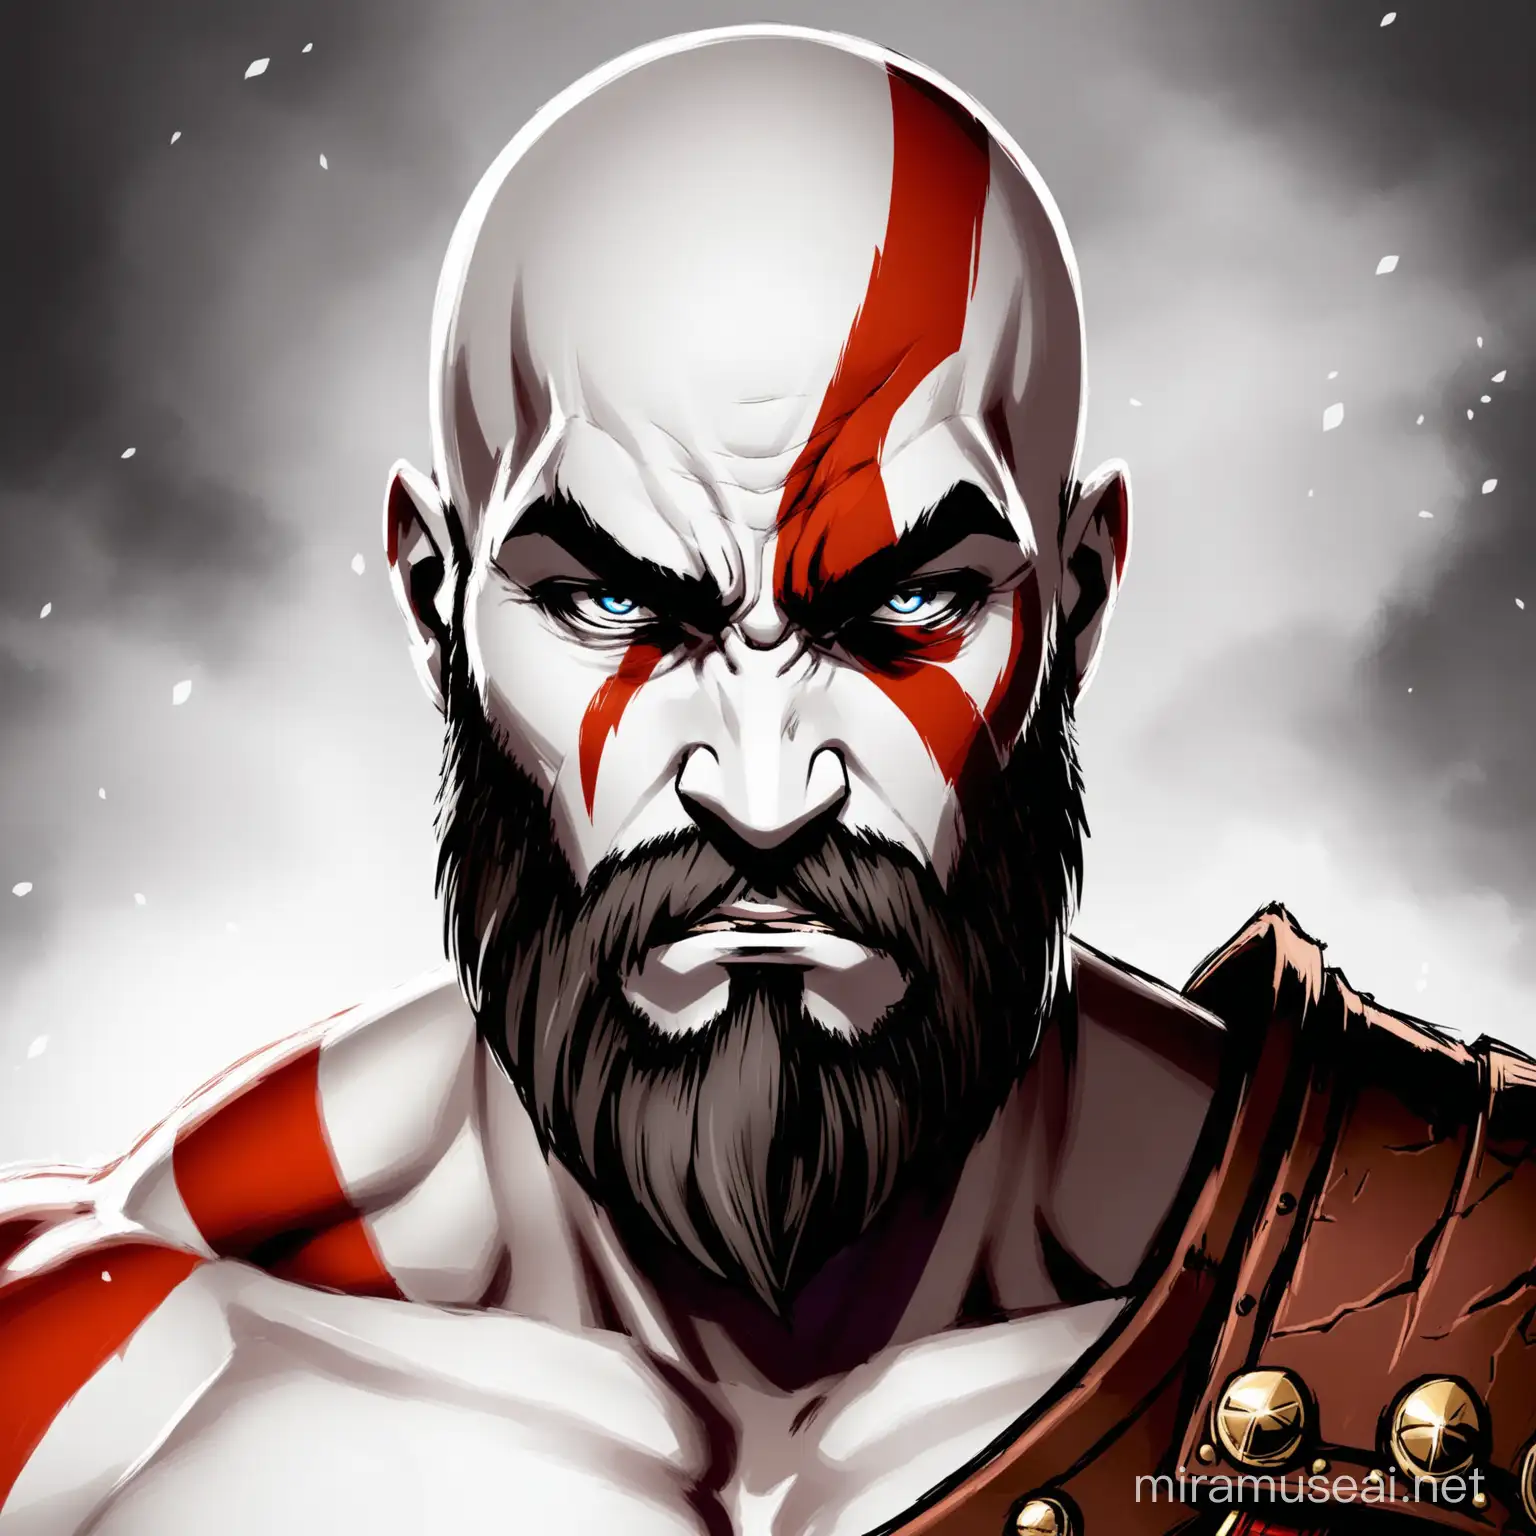 A frontal picture of Kratos from God of War Ragnorok looking at the camera